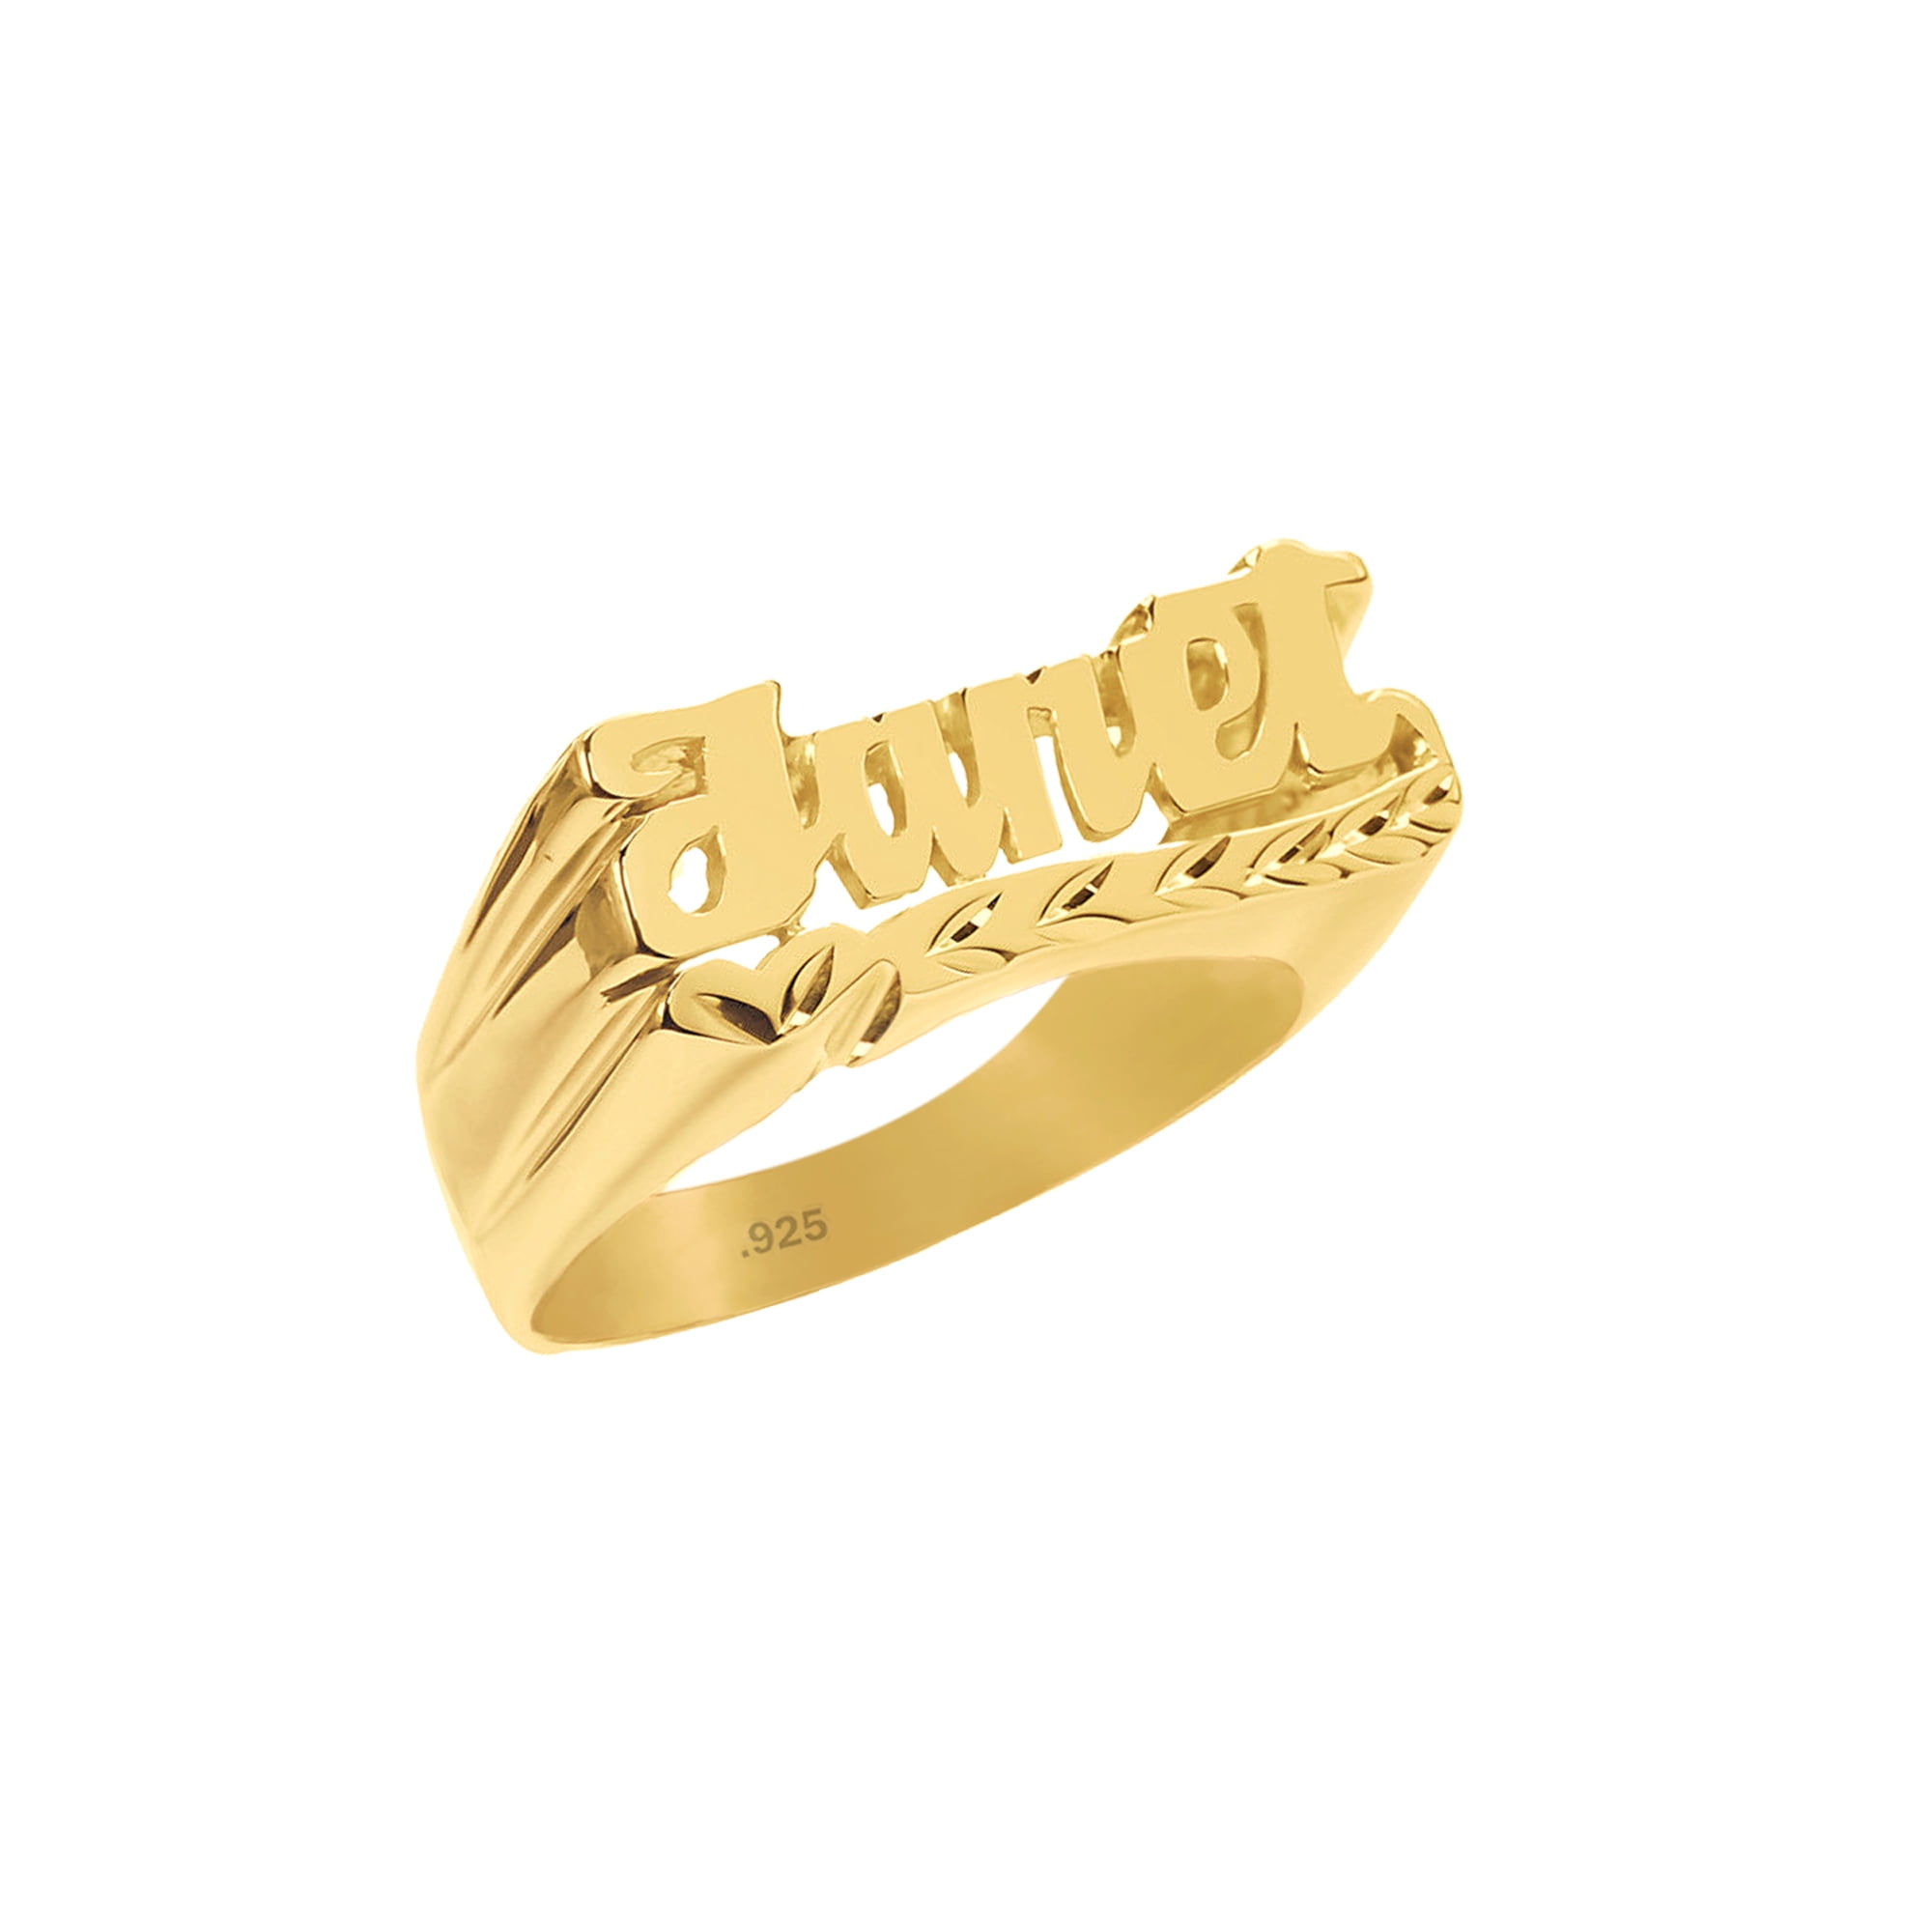 24K Gold Plated Sterling Silver Personalized Name Ring Heart and Leaf Design Below Name Size 7 Made in USA 0cfba4f1 2426 47e2 95ca 4a1f6083c868.3eb82b764747c1d7297a51ab9f984a56